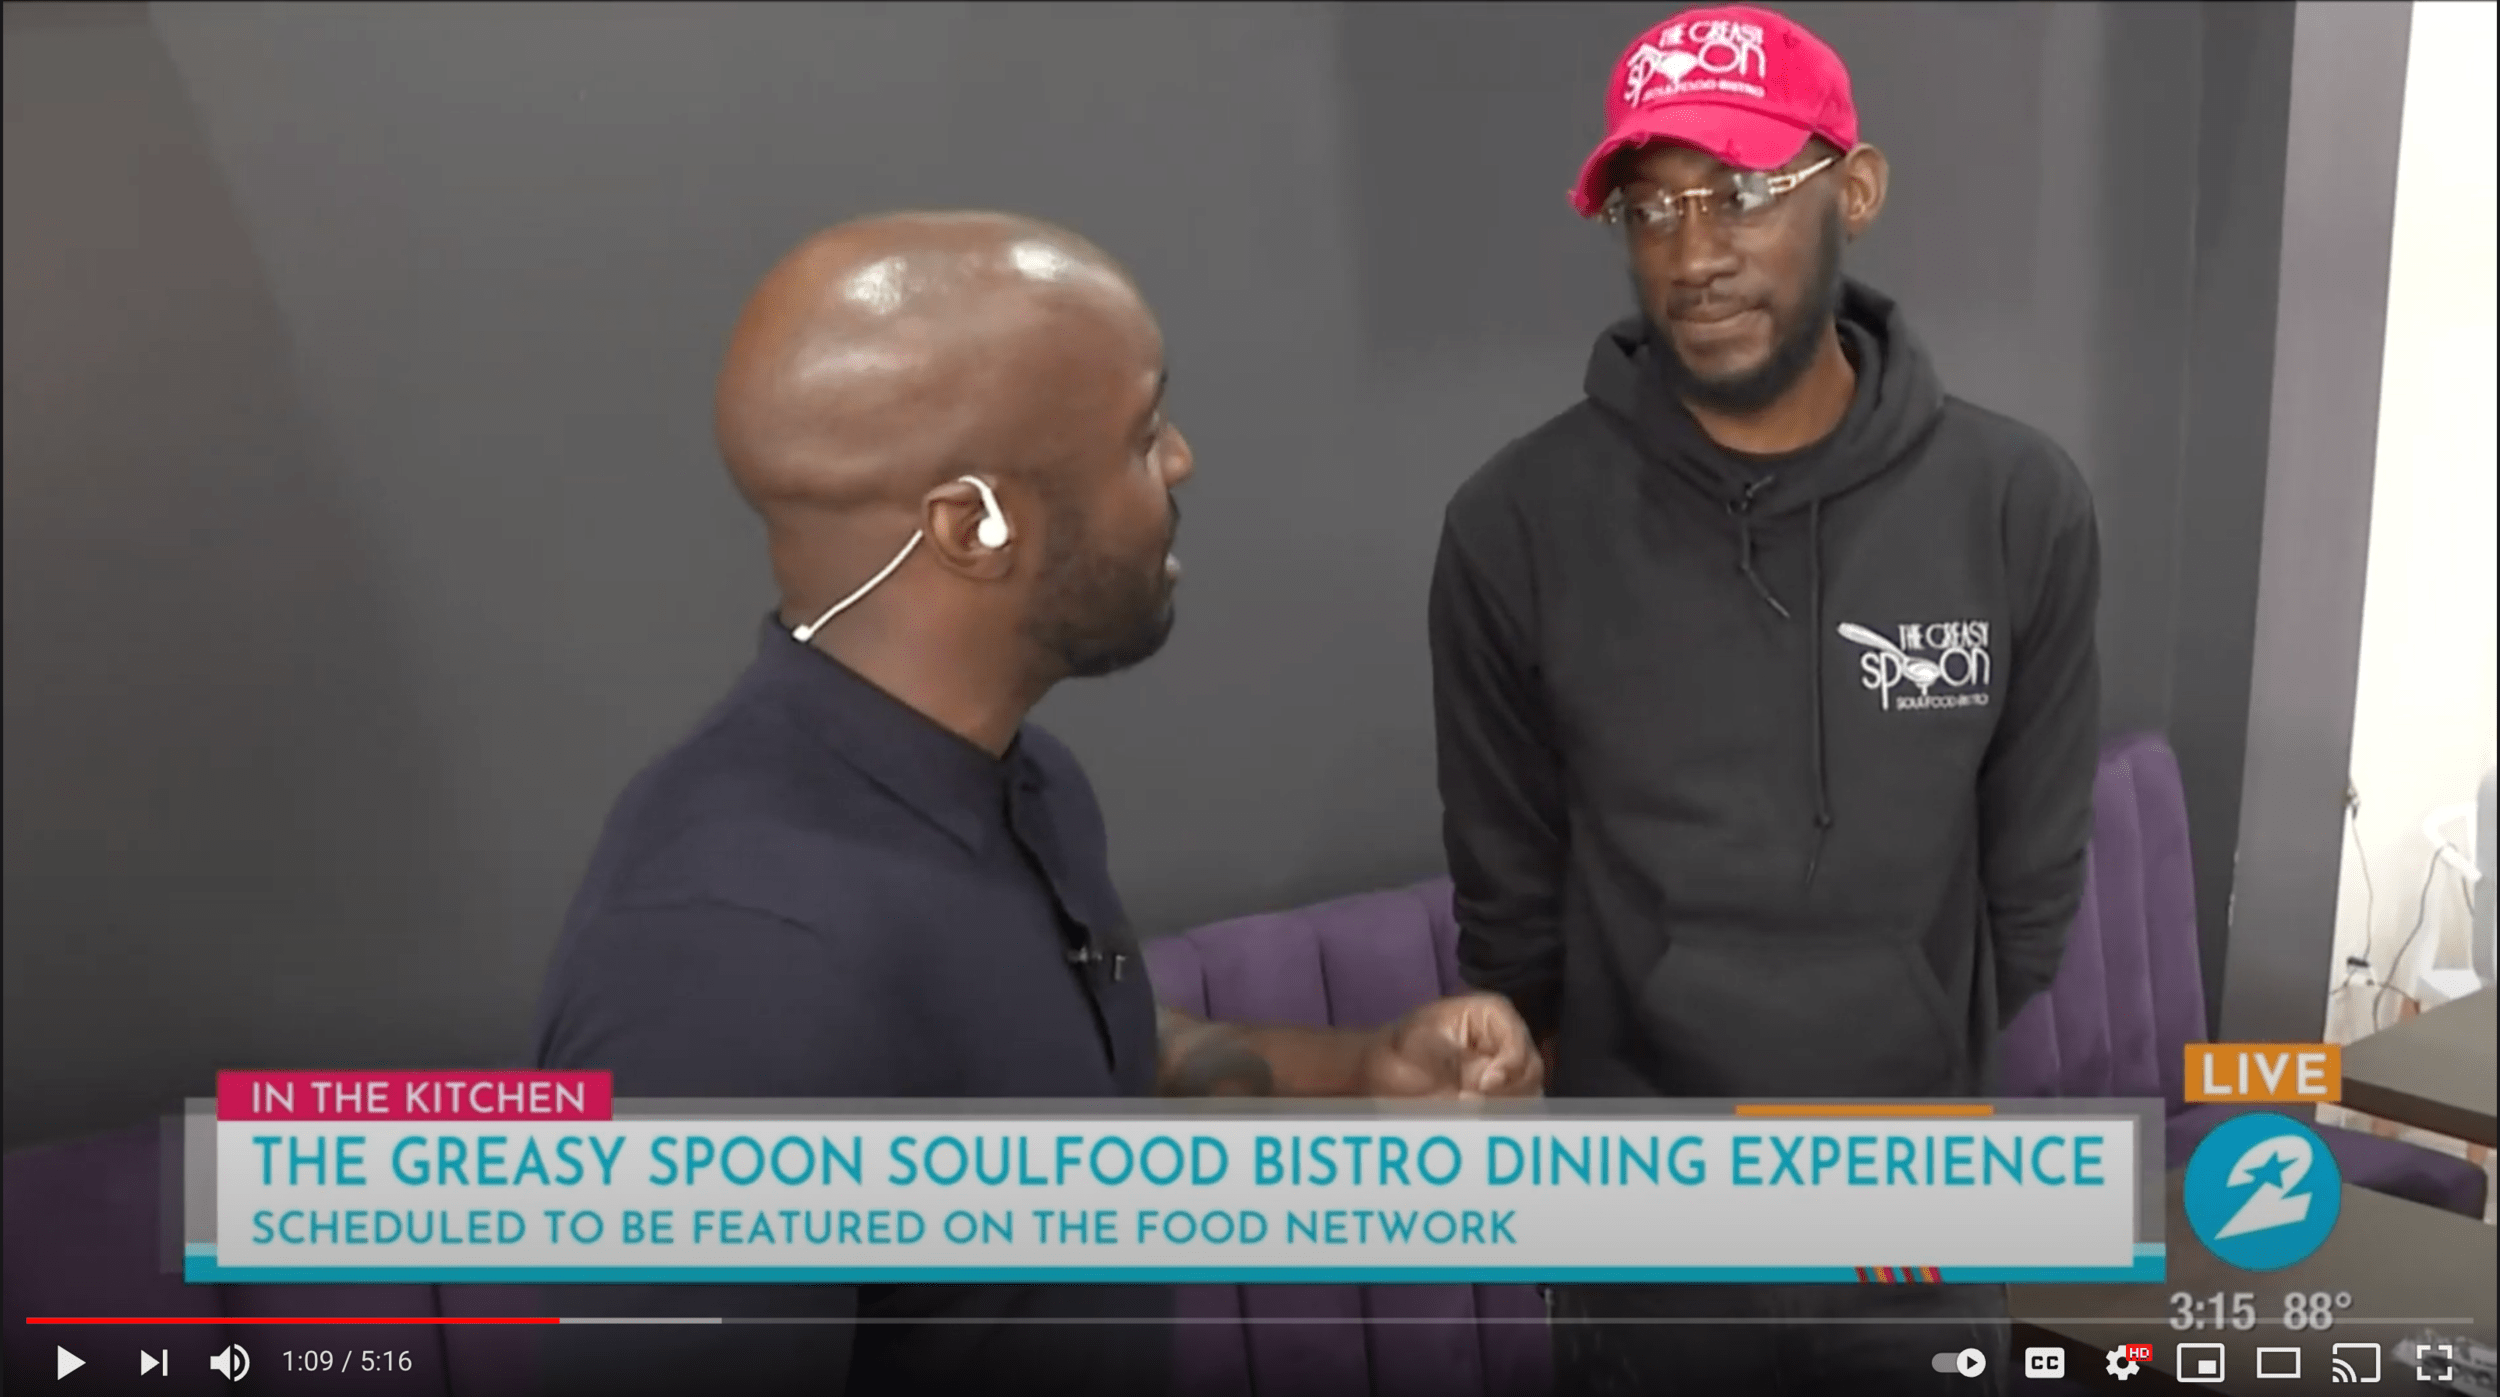 The Greasy Spoon Soulfood Bistro to be featured on Food Network | HOUSTON LIFE